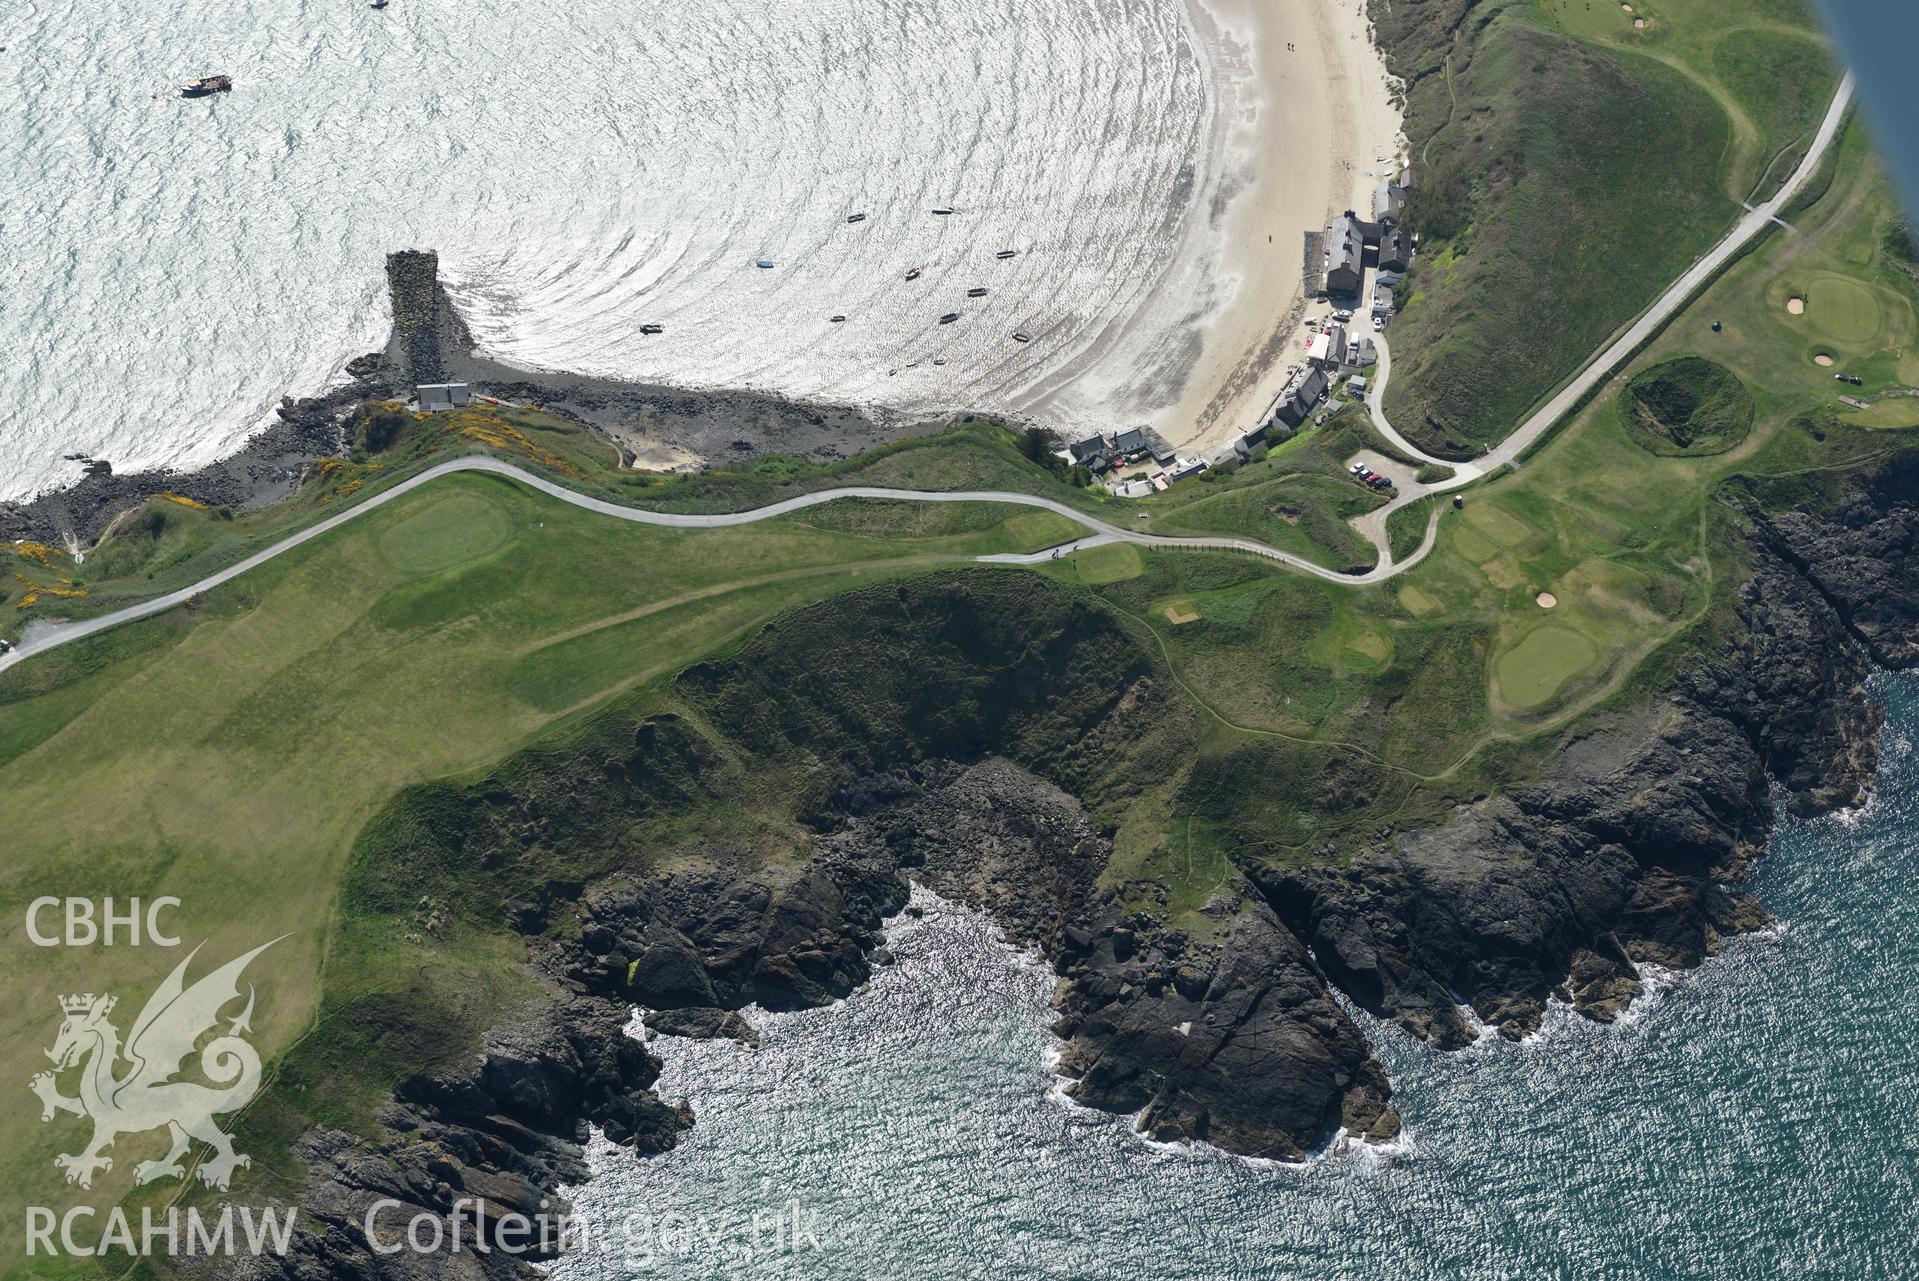 Aerial photography of Porth Dinllaen lifeboat station taken on 3rd May 2017.  Baseline aerial reconnaissance survey for the CHERISH Project. ? Crown: CHERISH PROJECT 2017. Produced with EU funds through the Ireland Wales Co-operation Programme 2014-2020.